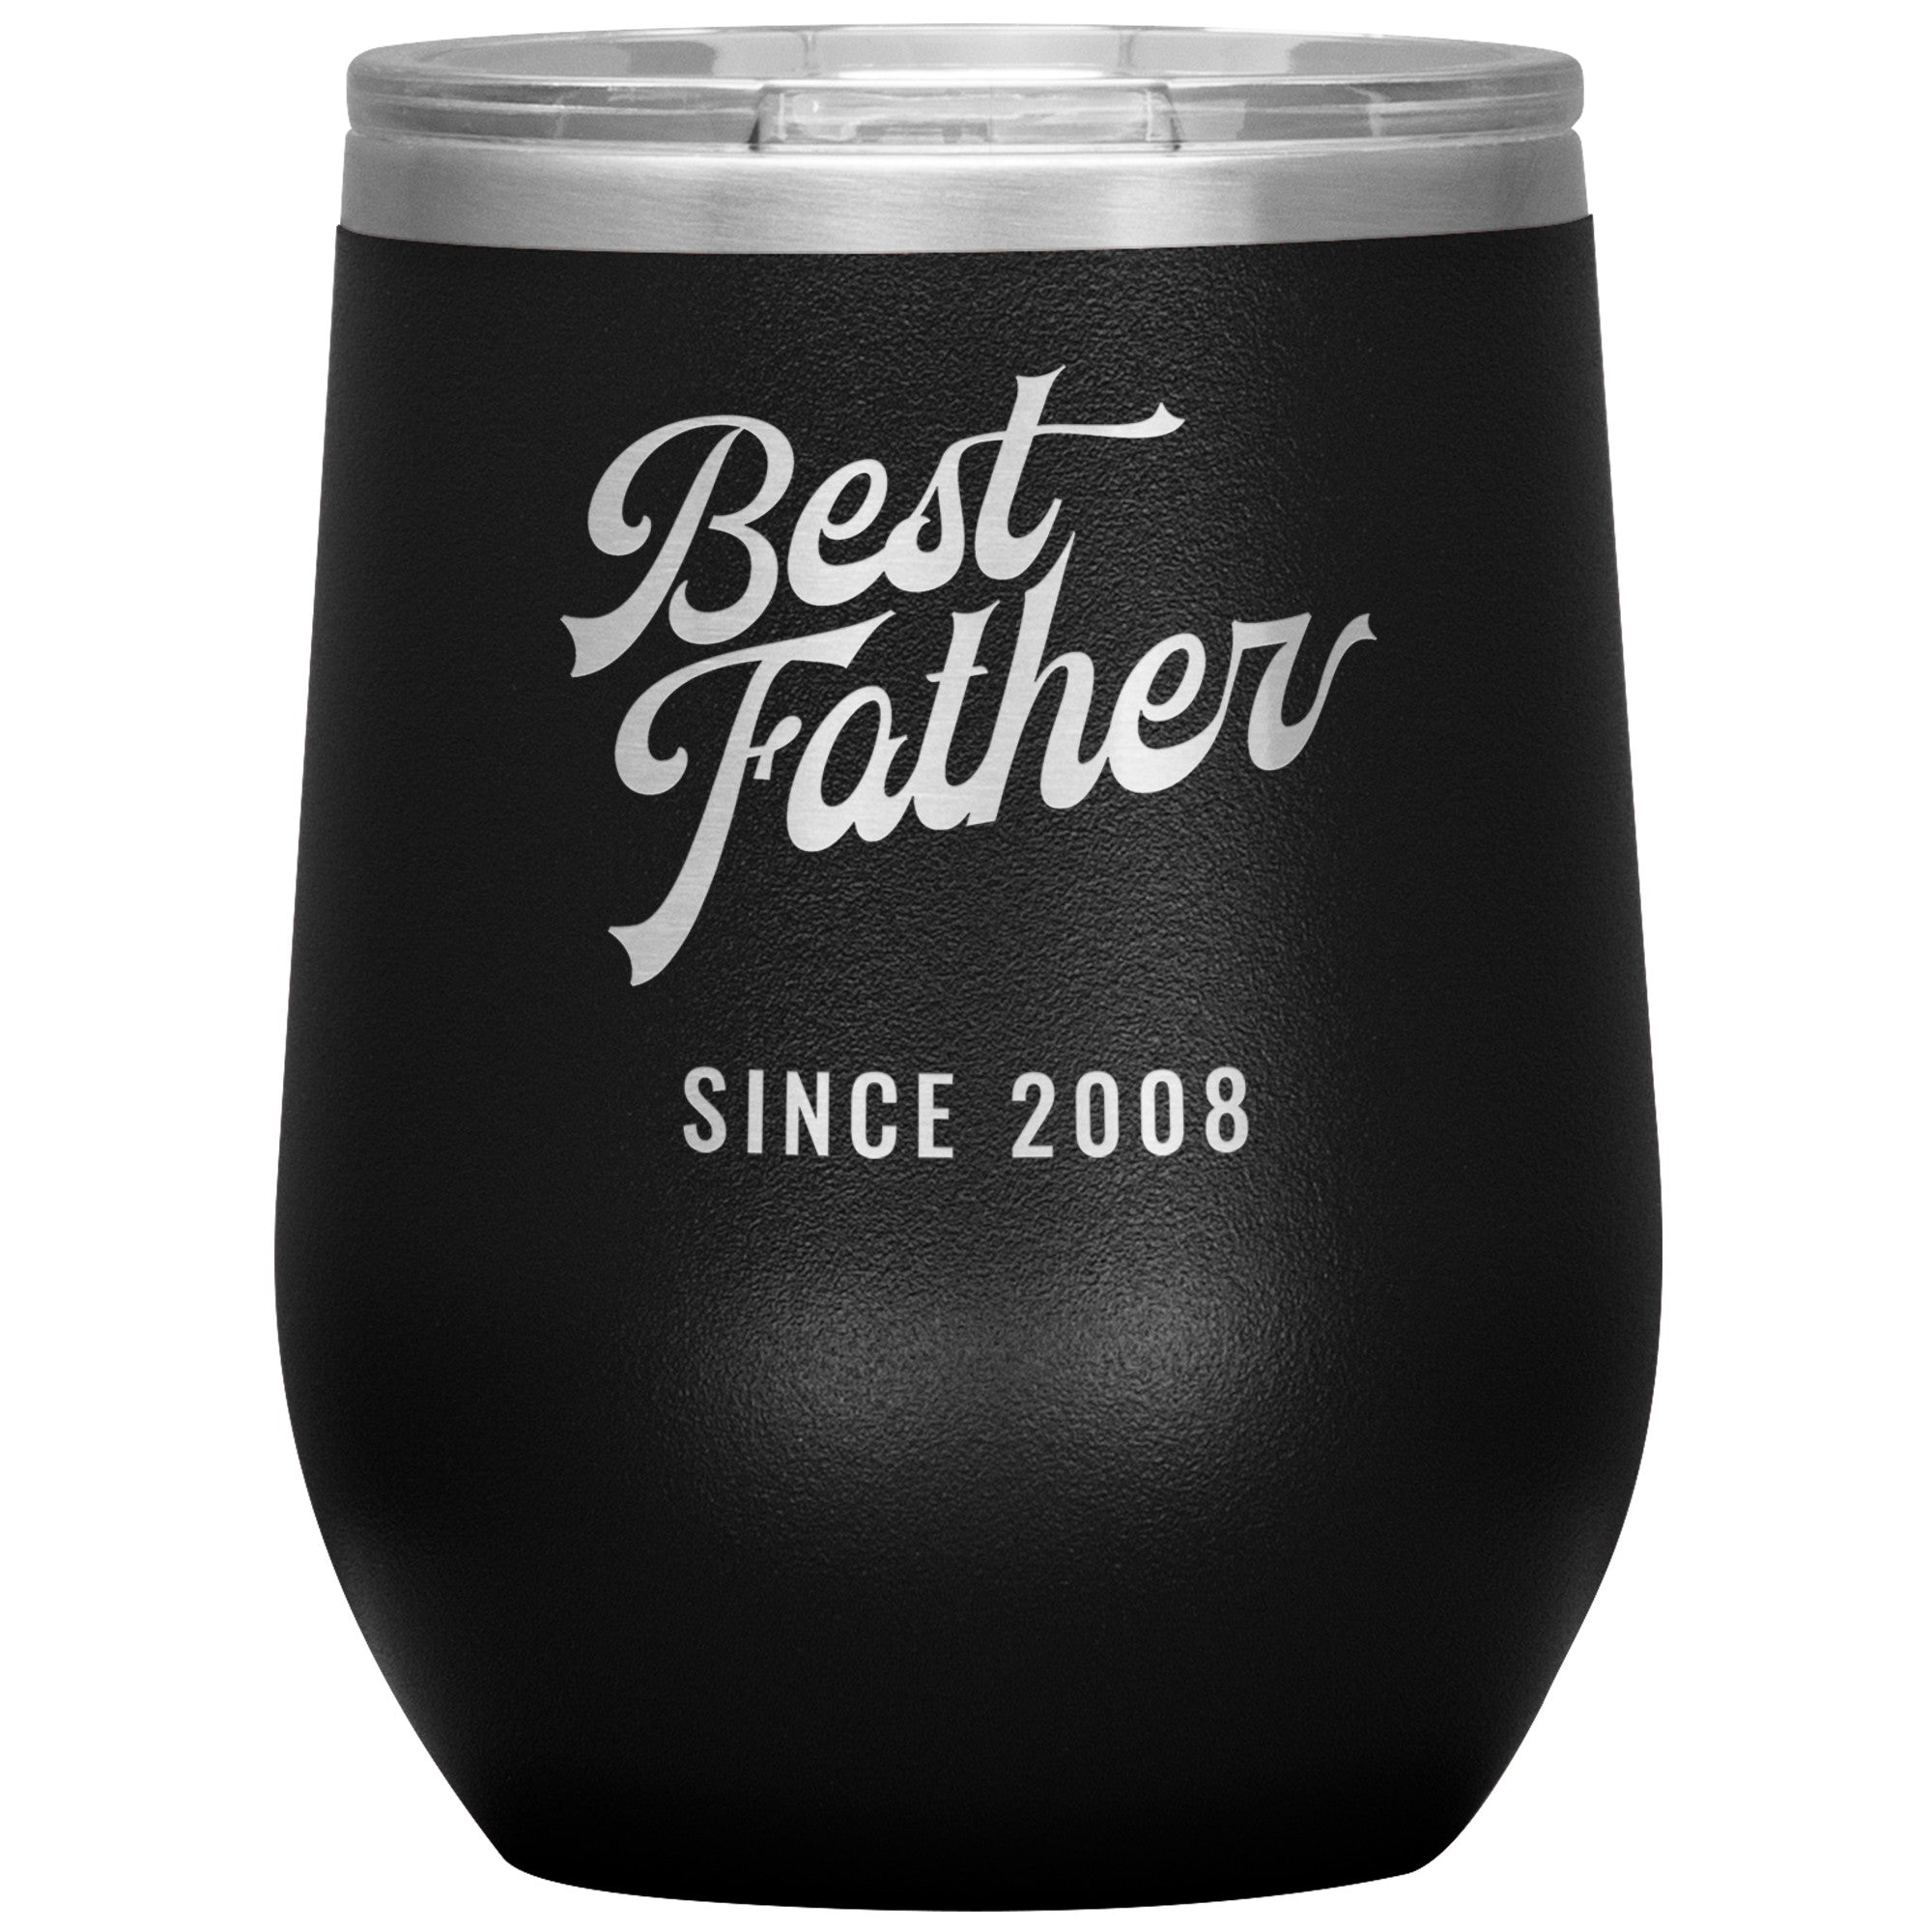 Best Father Since 2008 - 12oz Insulated Wine Tumbler